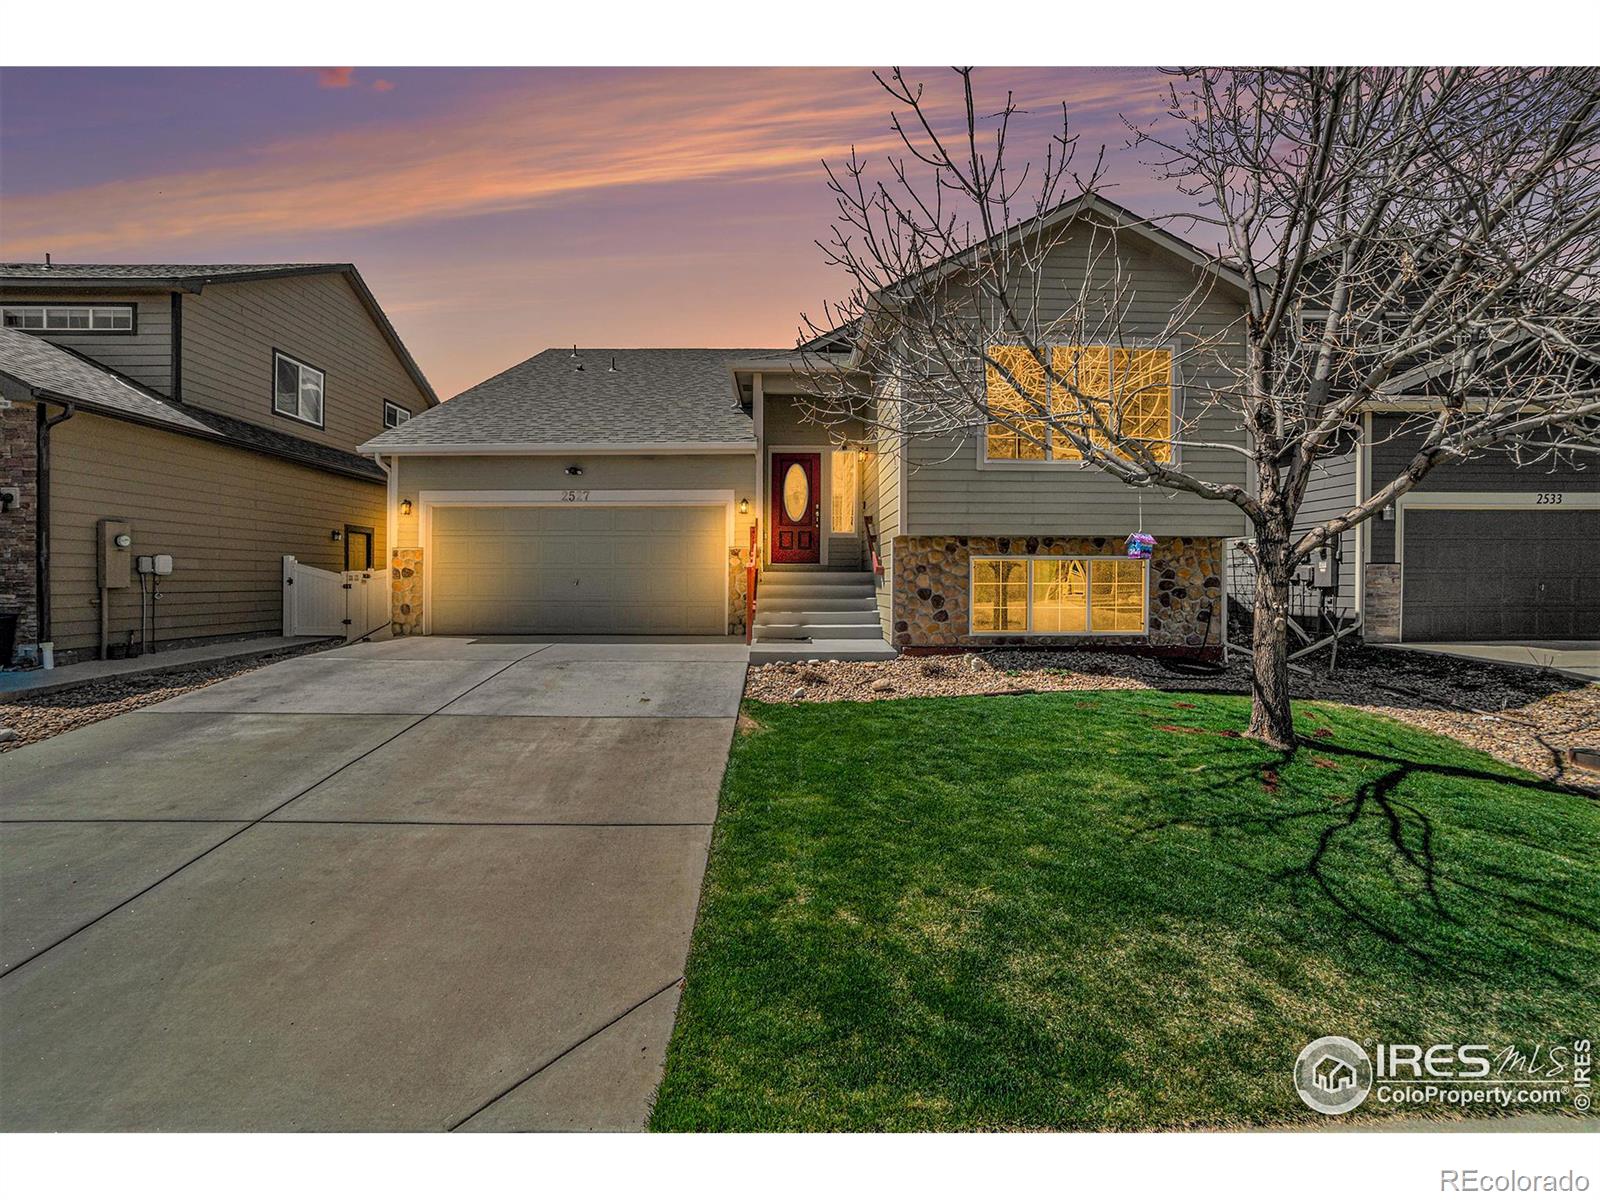 2527  Forecastle Drive, fort collins MLS: 4567891007010 Beds: 3 Baths: 3 Price: $515,000